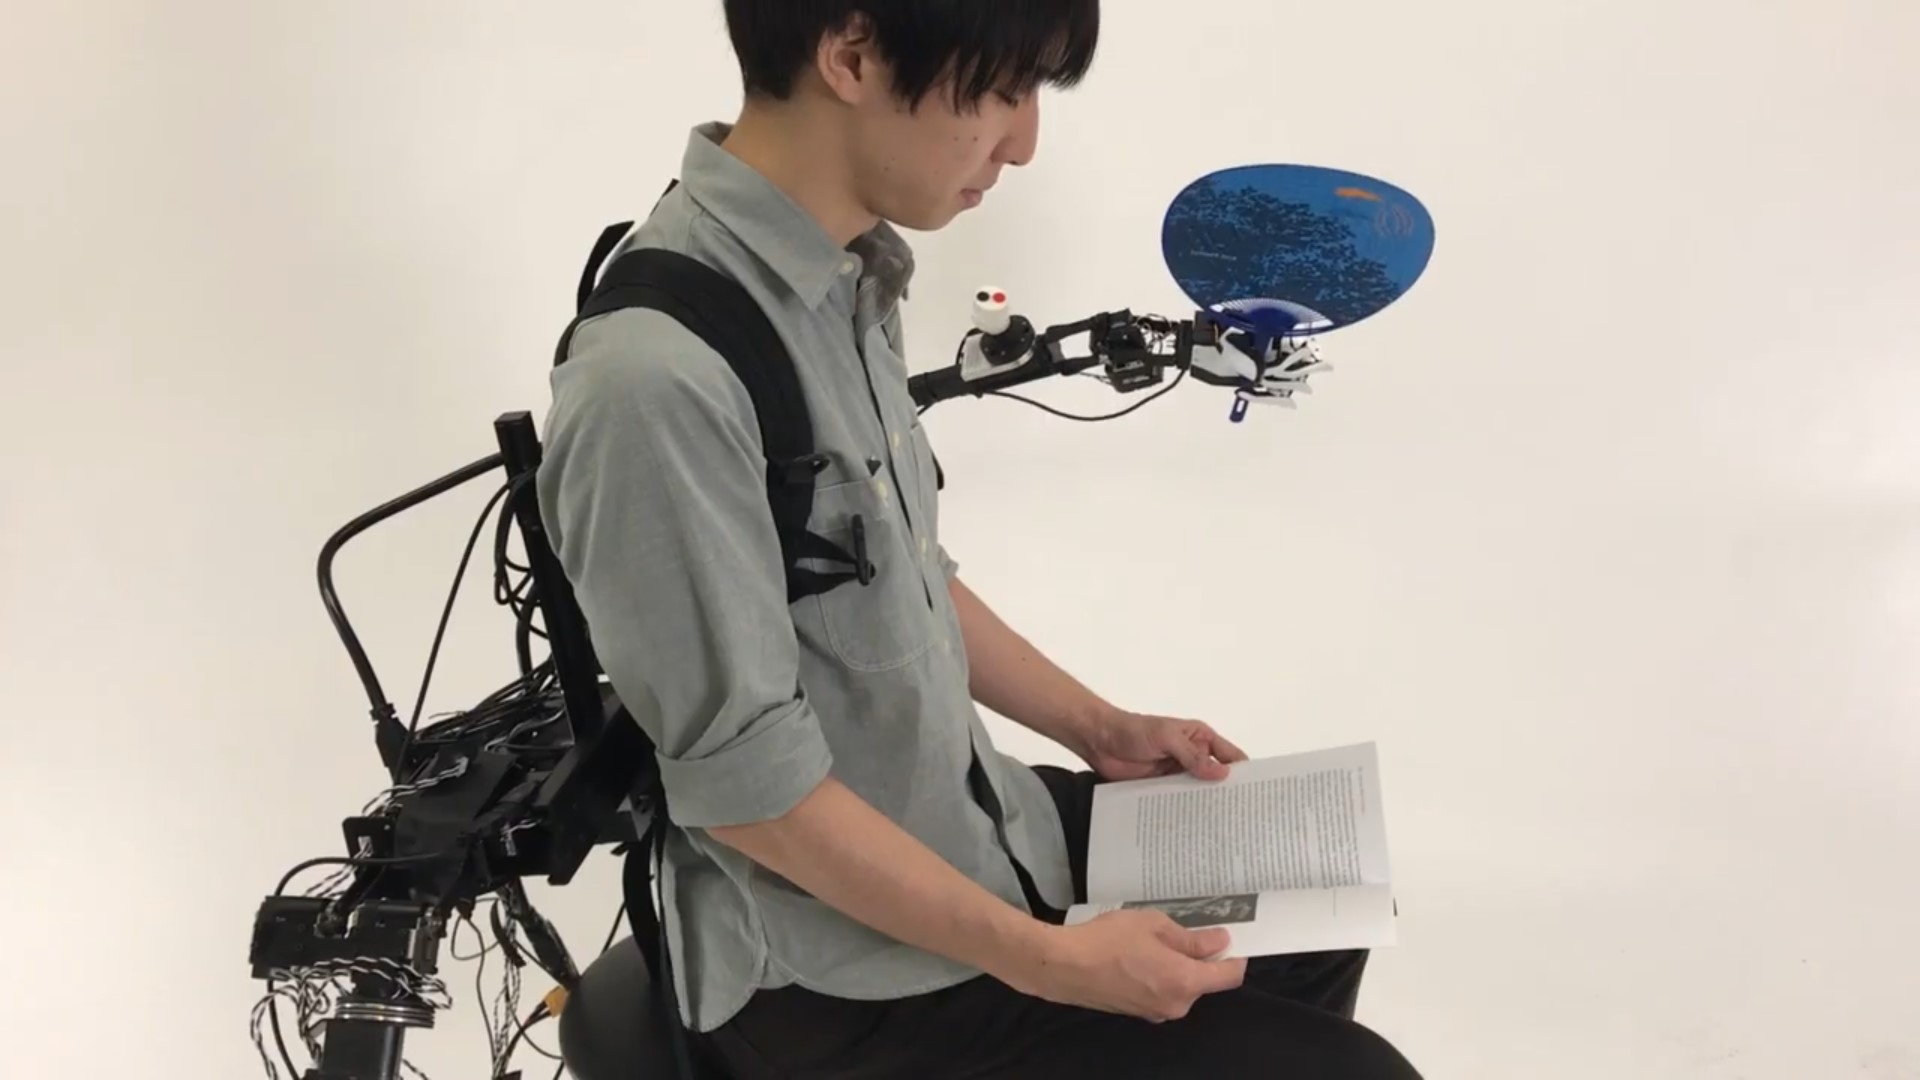 Man reads a book with his real arms while using the ISL robo-arms in Playback mode to swing a ping-pong paddle.